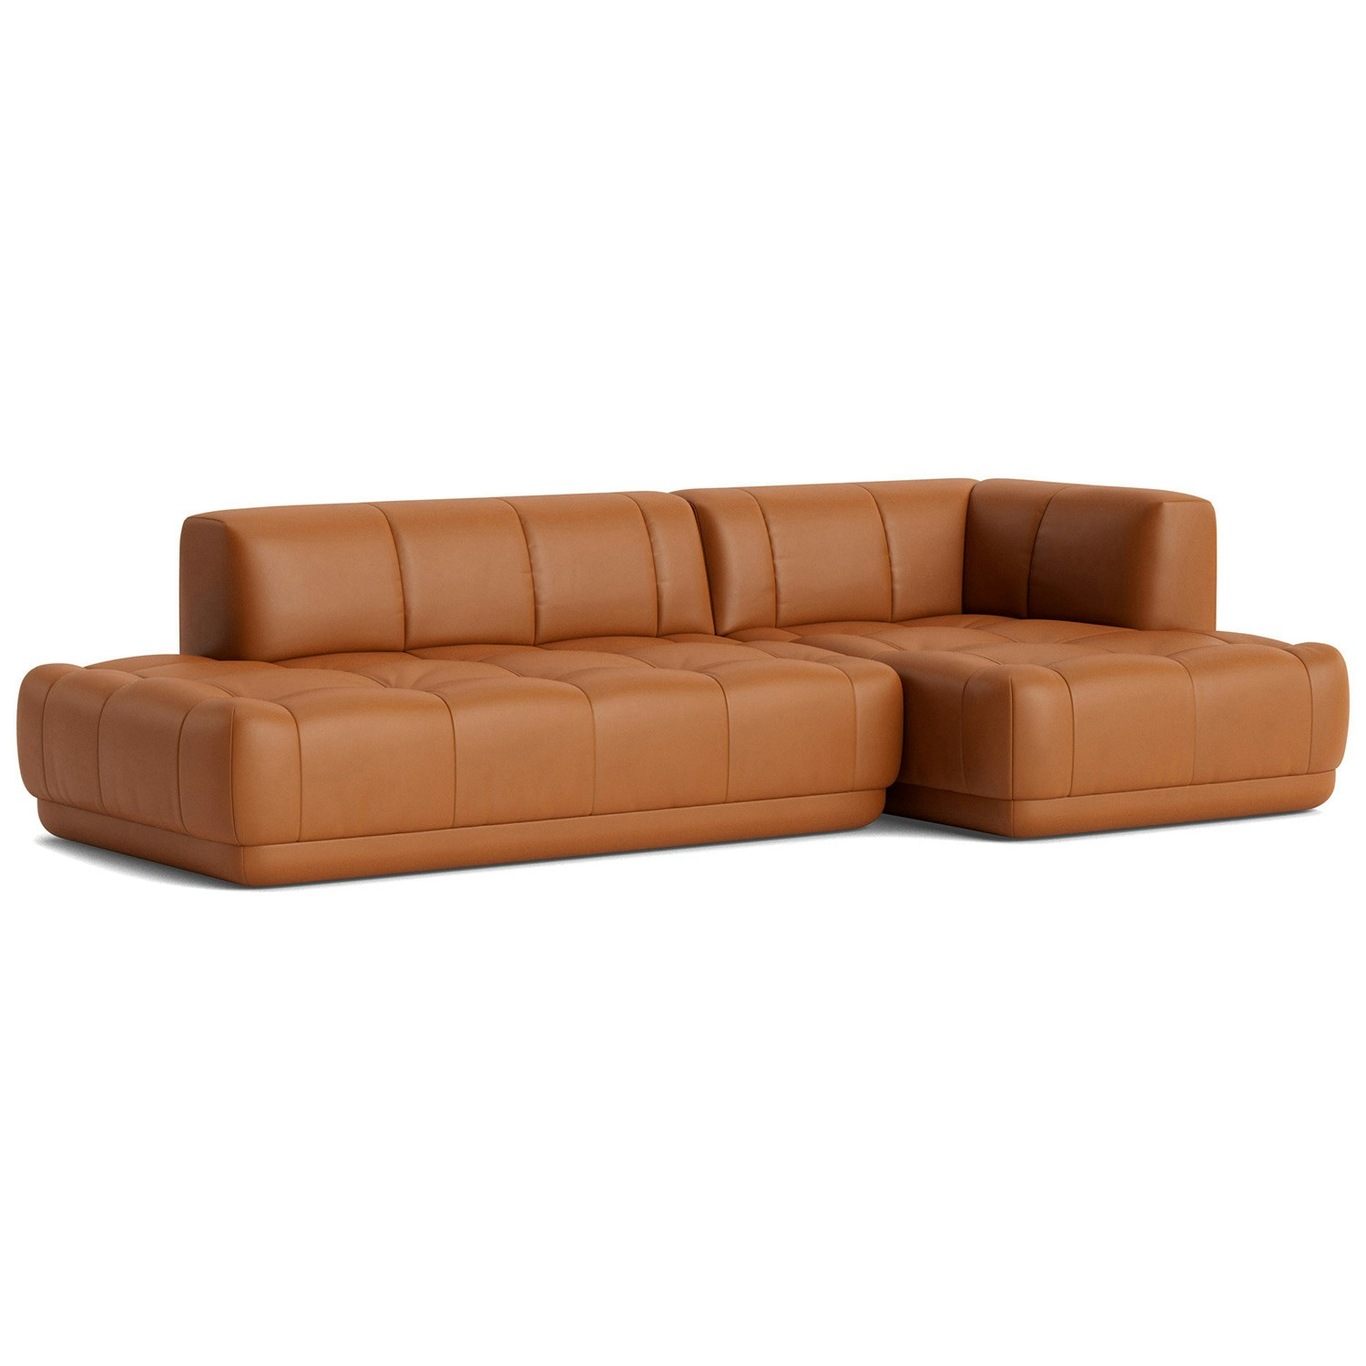 Quilton 3.5-Seater Sofa Configuration 21 Right, Leather Nevada NV2488